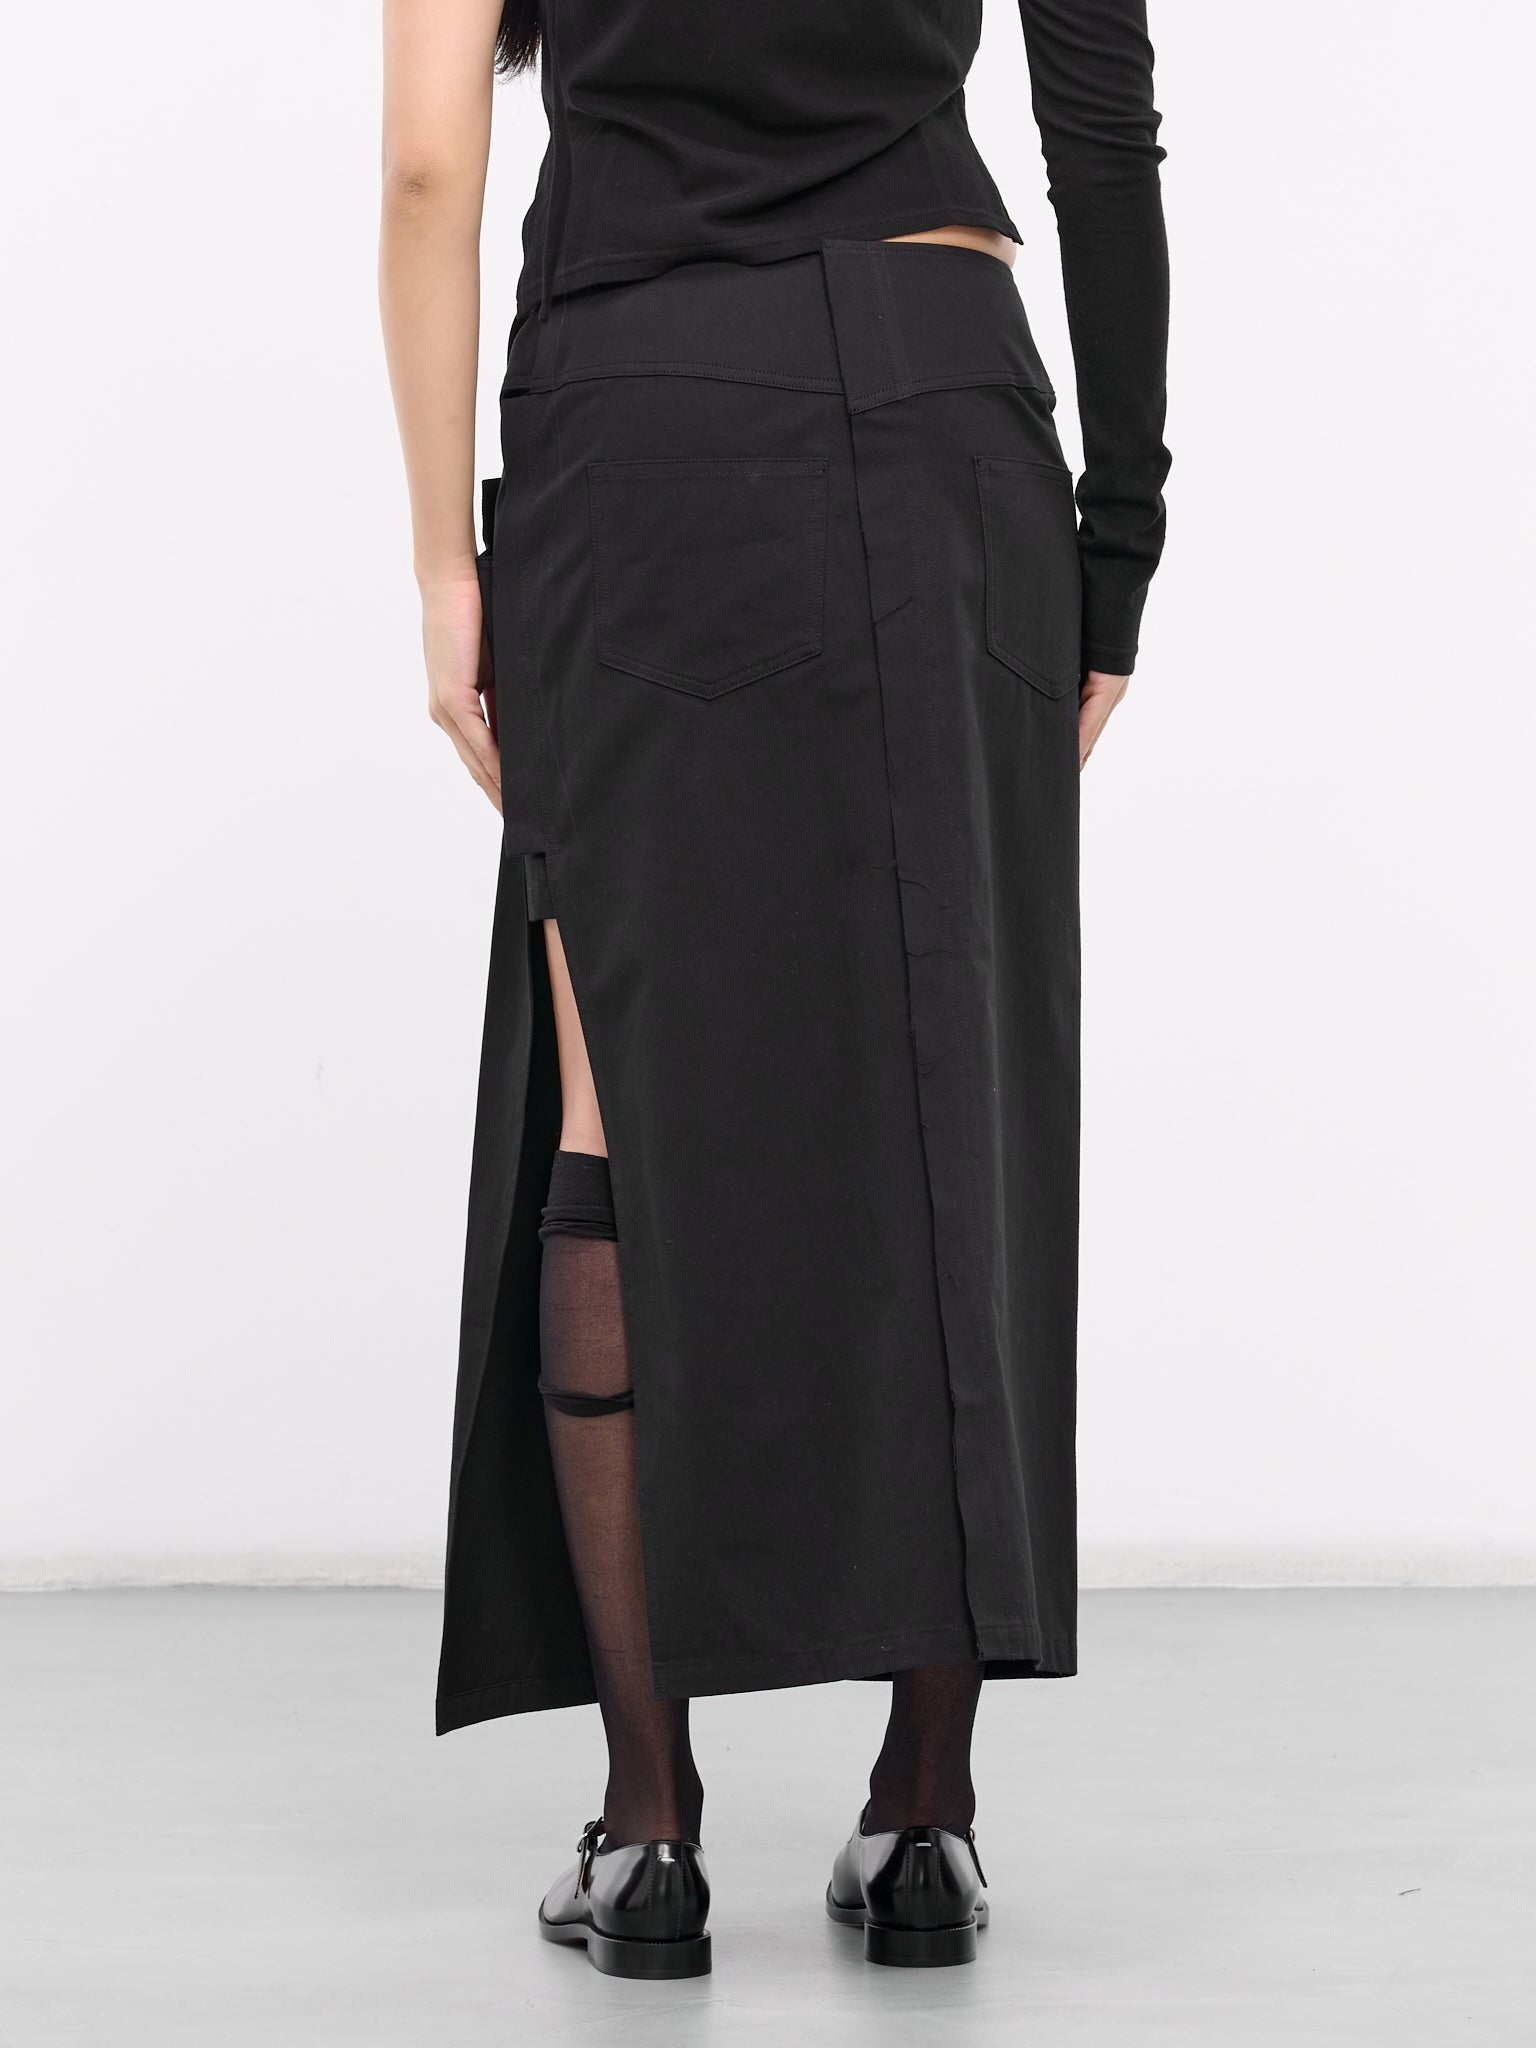 Lace-Up Maxi Skirt (FS-S68-002-BLACK)